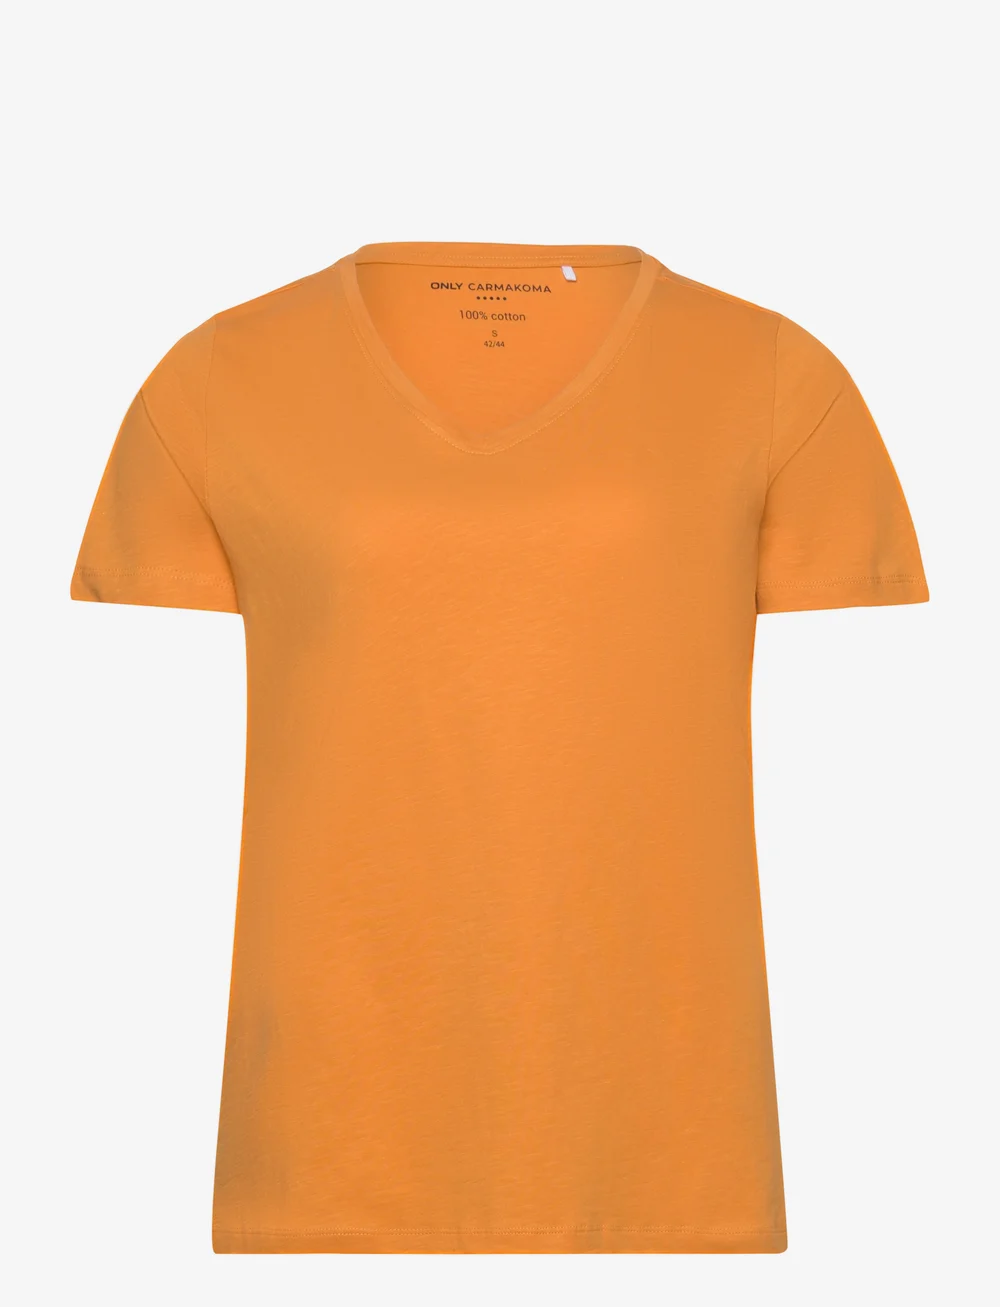 ONLY Carmakoma Carbonnie New Ss V-neck Tee Jrs - T-shirts